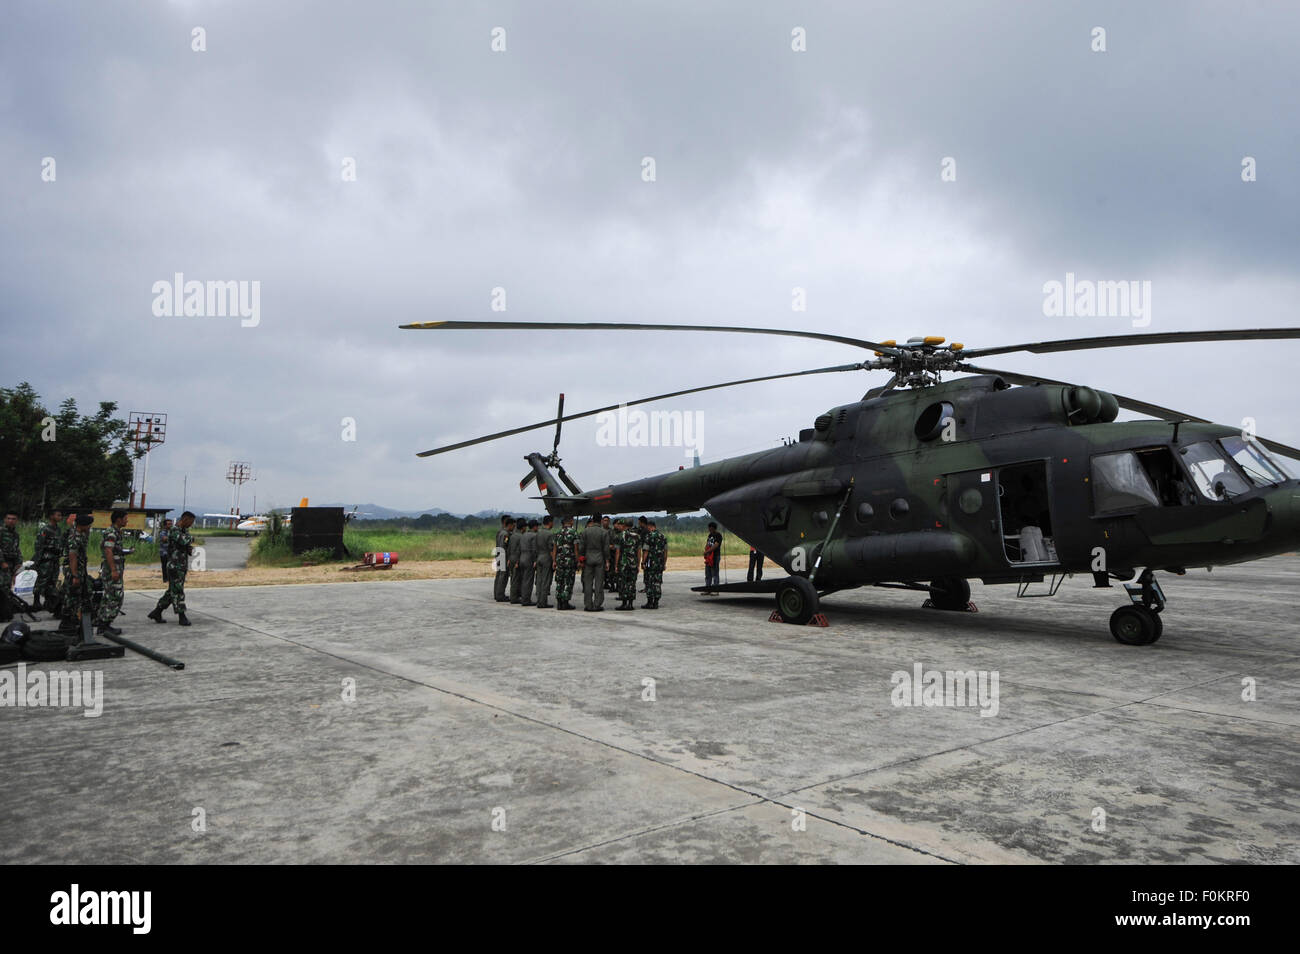 Jayapura, Indonesia. 18th Aug, 2015. Soldiers prepare to leave for the Trigana Air Service flight's crash site for rescue operations, at an air base in Jayapura, Indonesia, Aug. 18, 2015. Credit:  Veri Sanovri/Xinhua/Alamy Live News Stock Photo